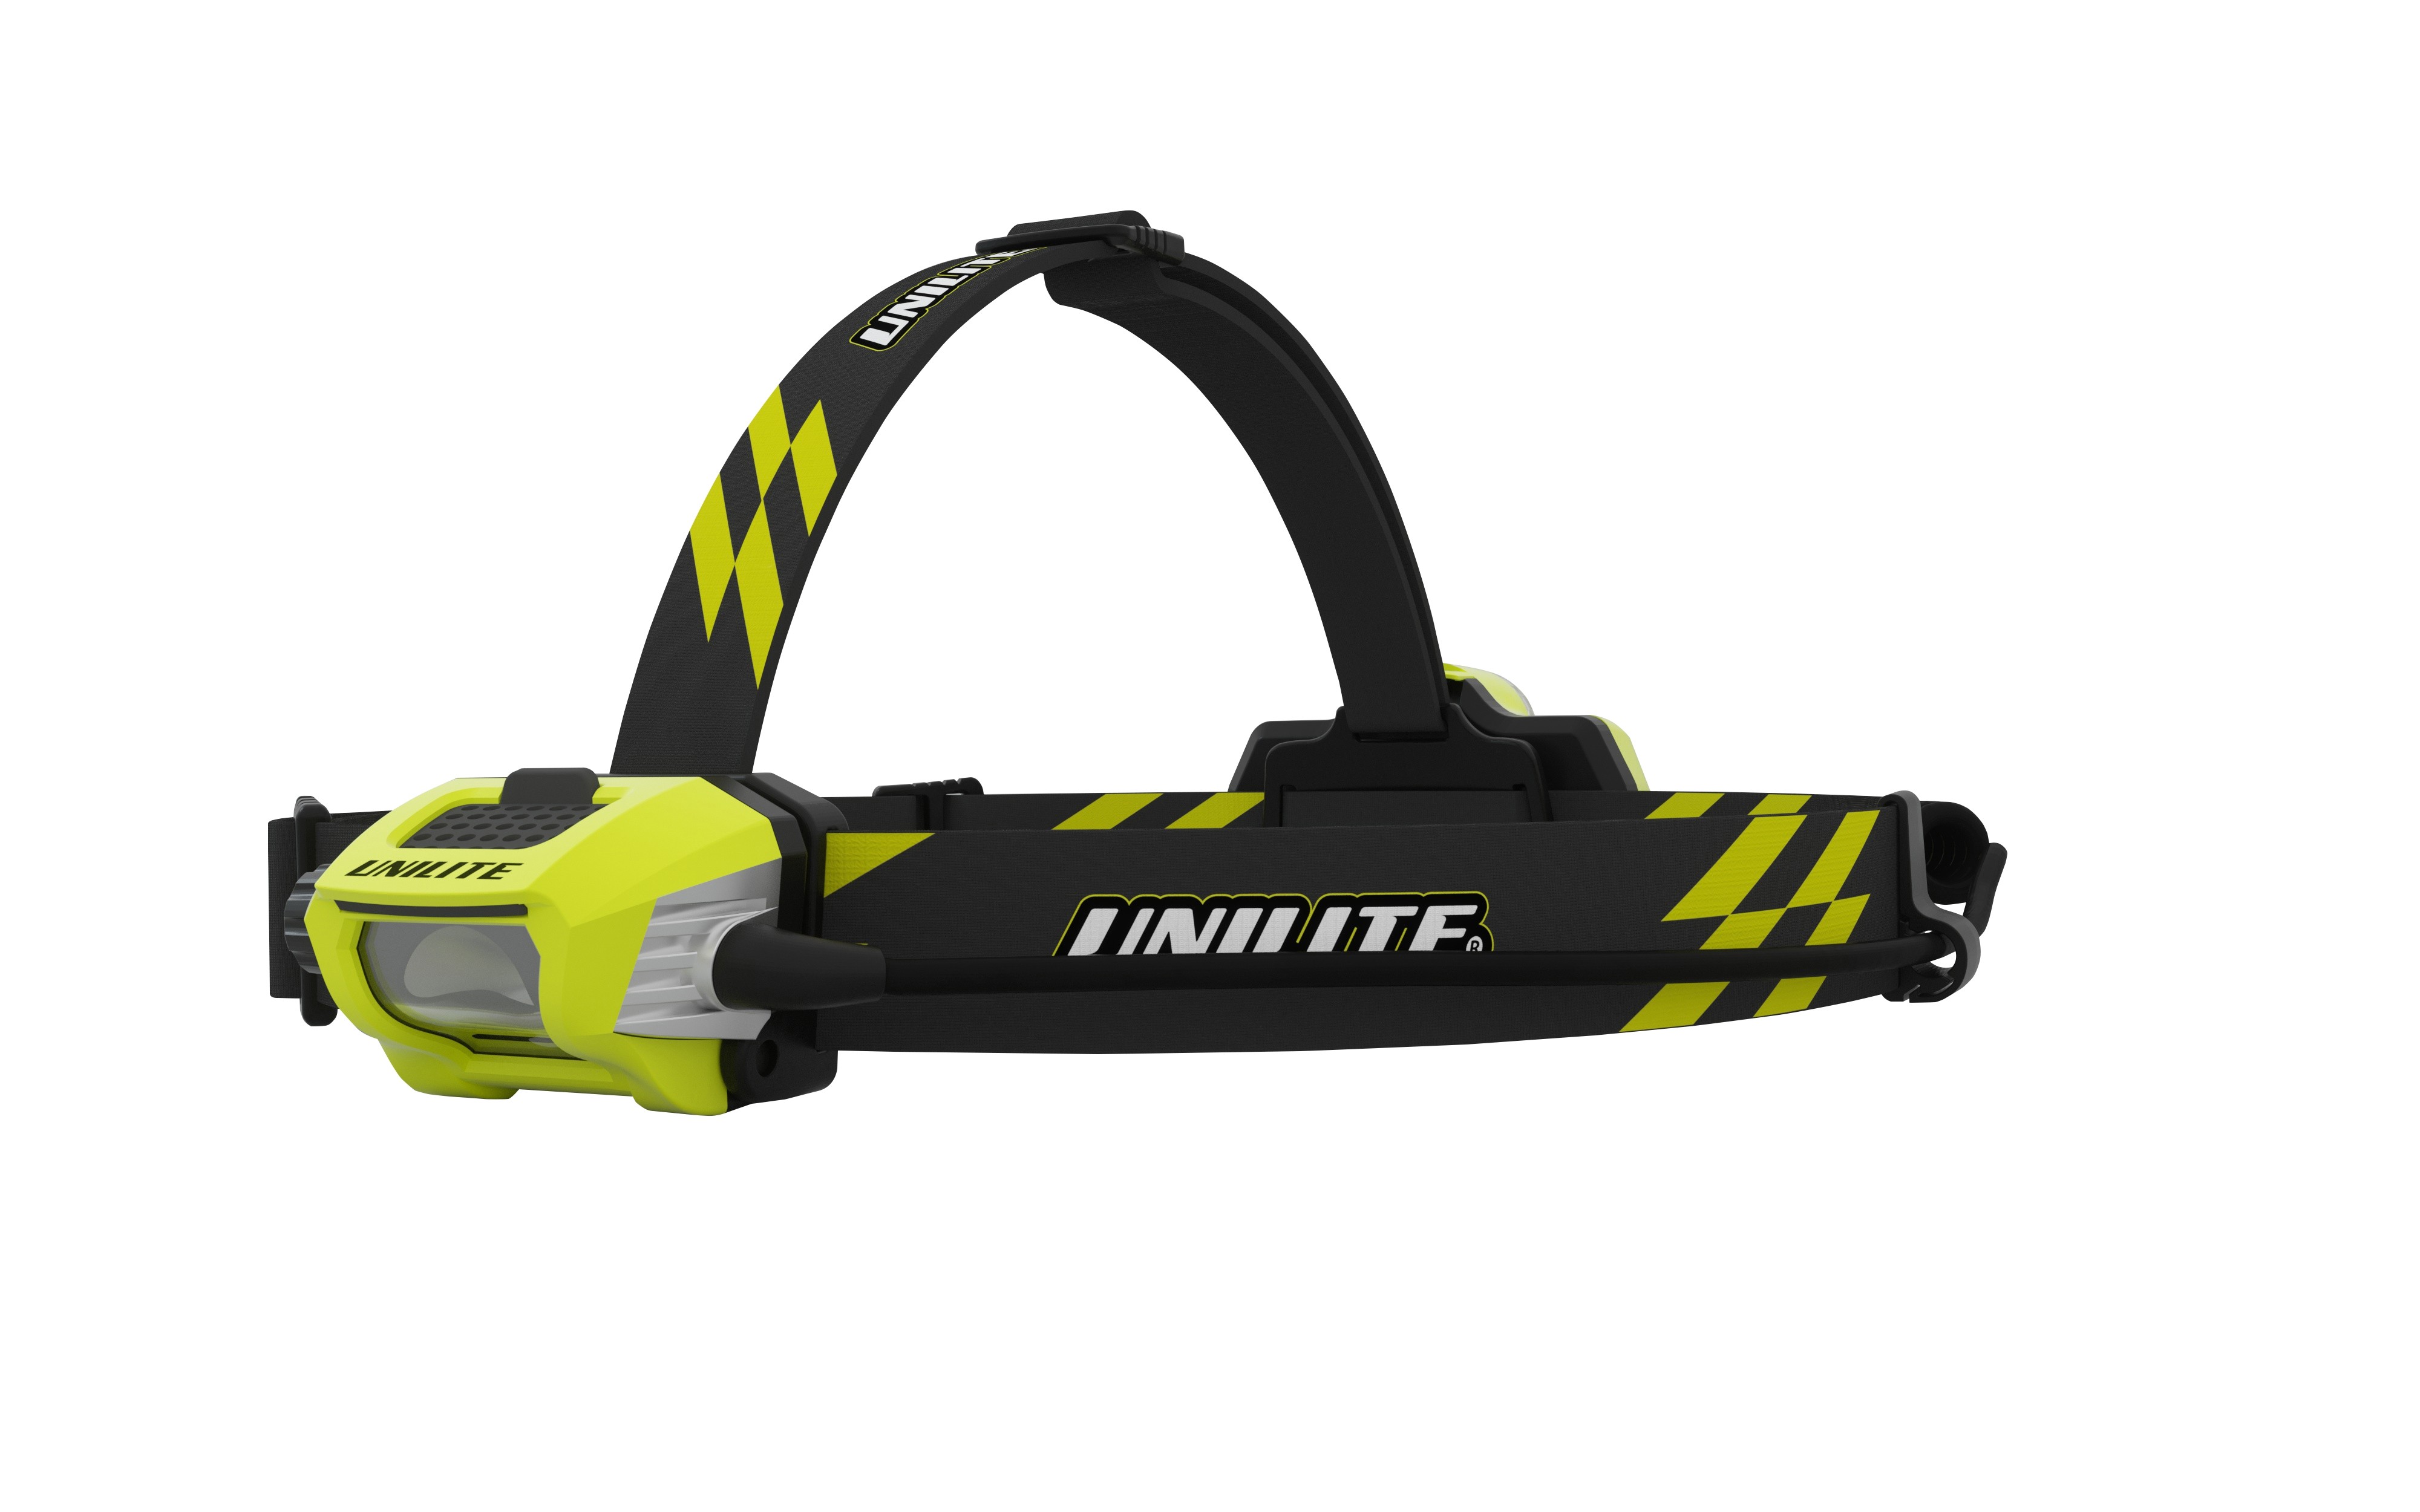 Unilite Industrial LED Headlight PS-HDL9R 750 Lm USB Rechargeable